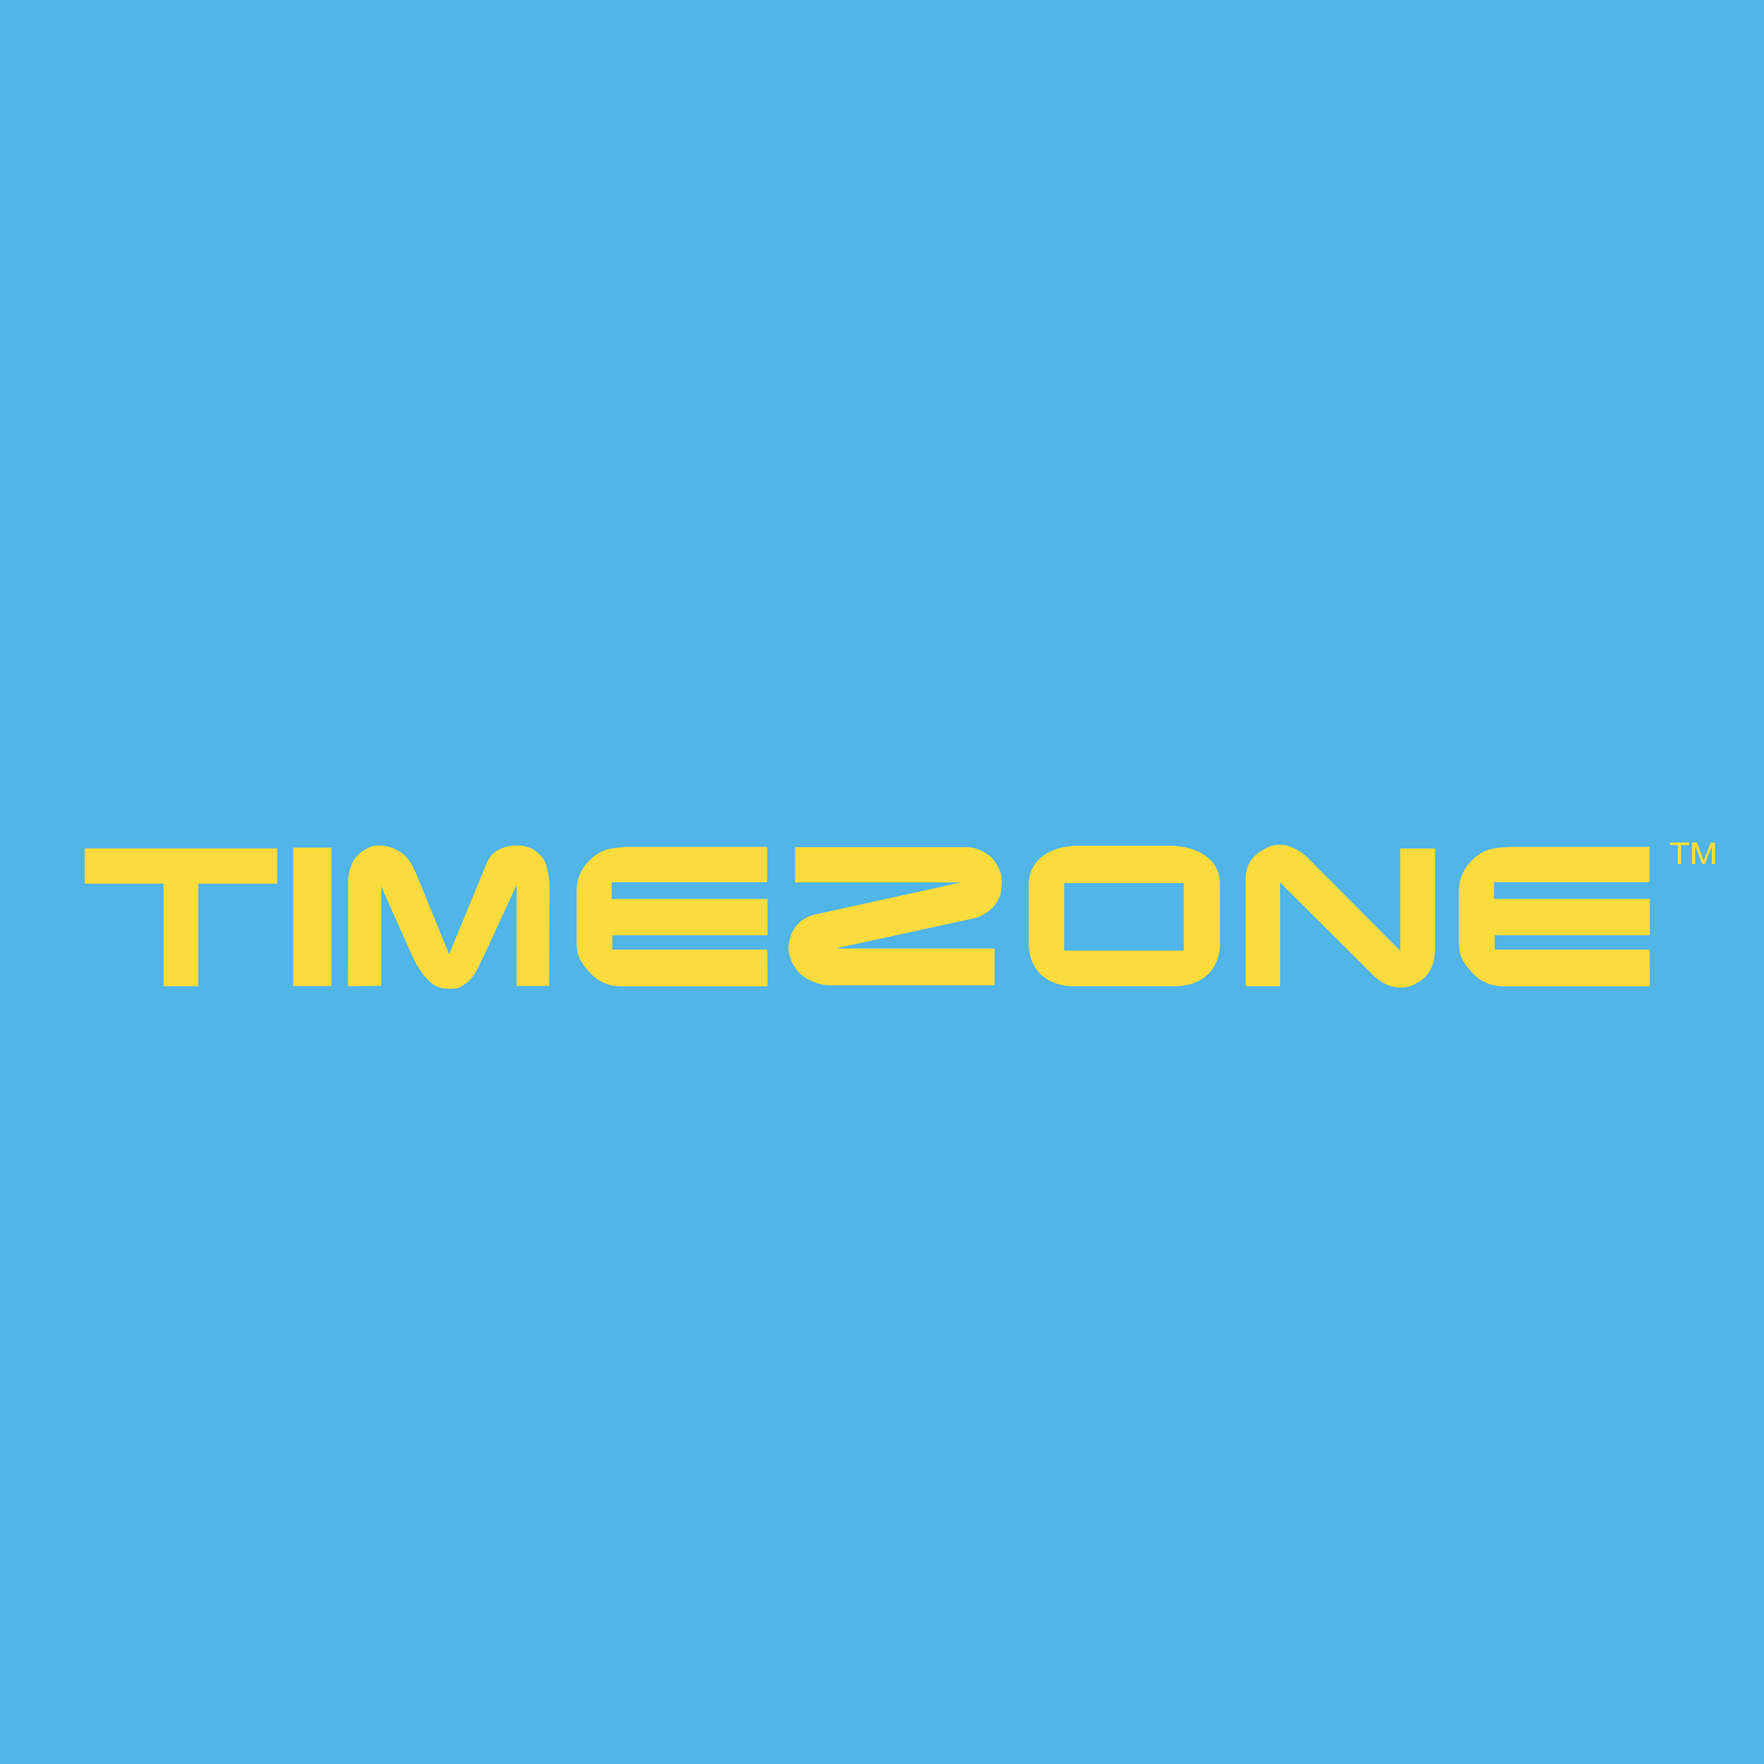 Timezone (Northpoint City) - Dine, Shop, Earn